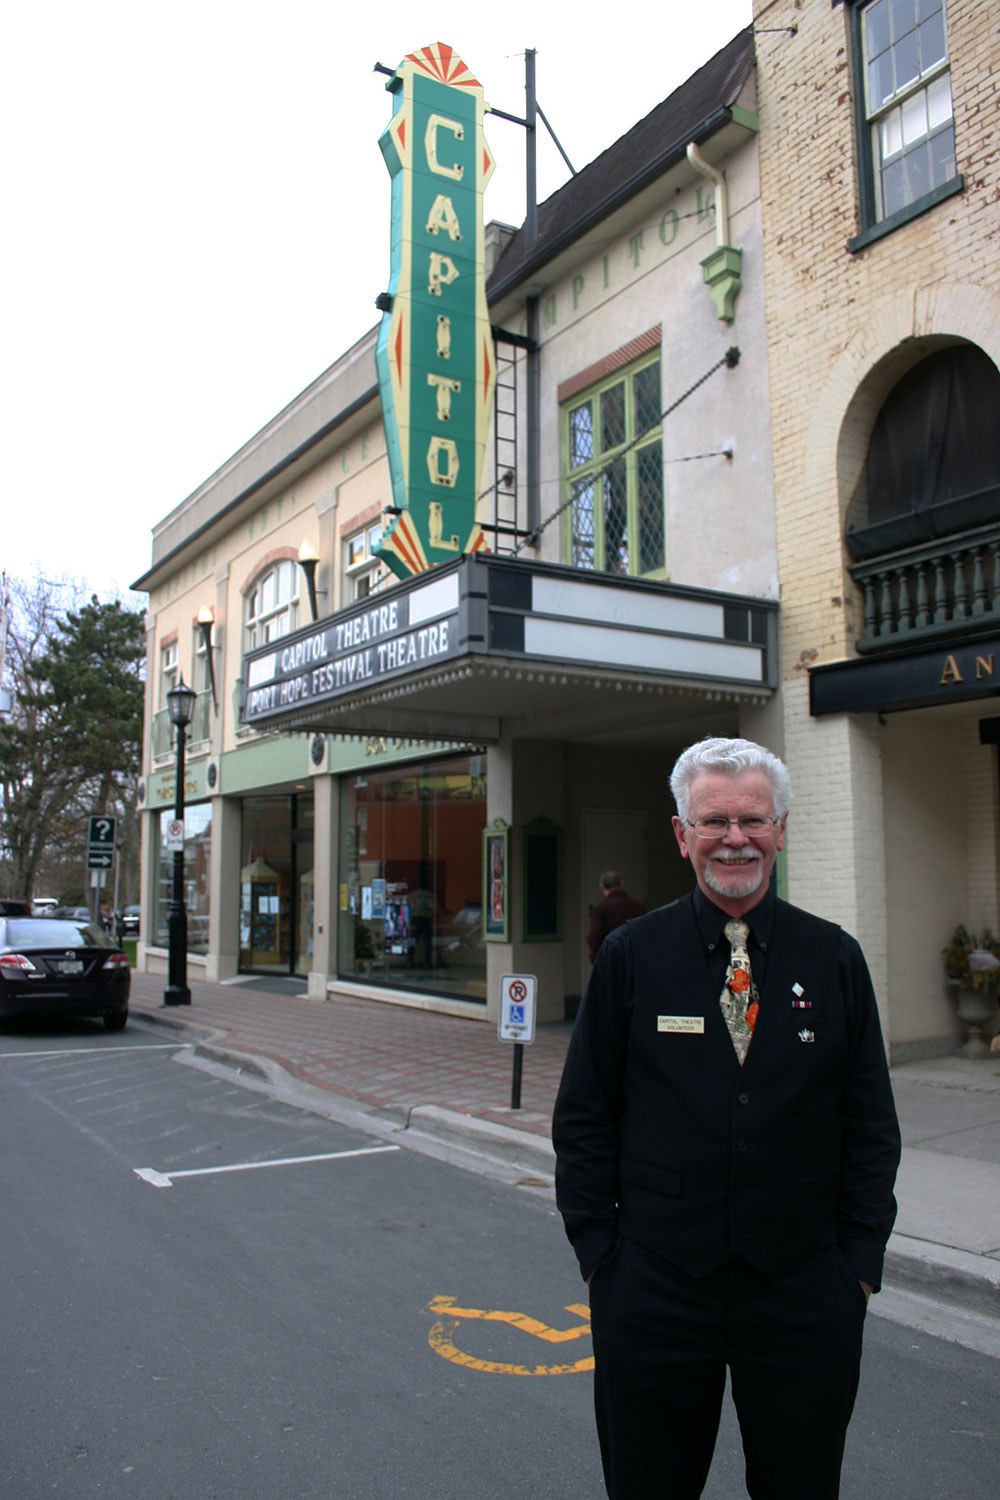 Peter Bolton volunteers at the Capitol Theatre, a private non-profit organization that benefits from the donations of local industry, individuals and the municipality. (Photo: Stephen Ashton)